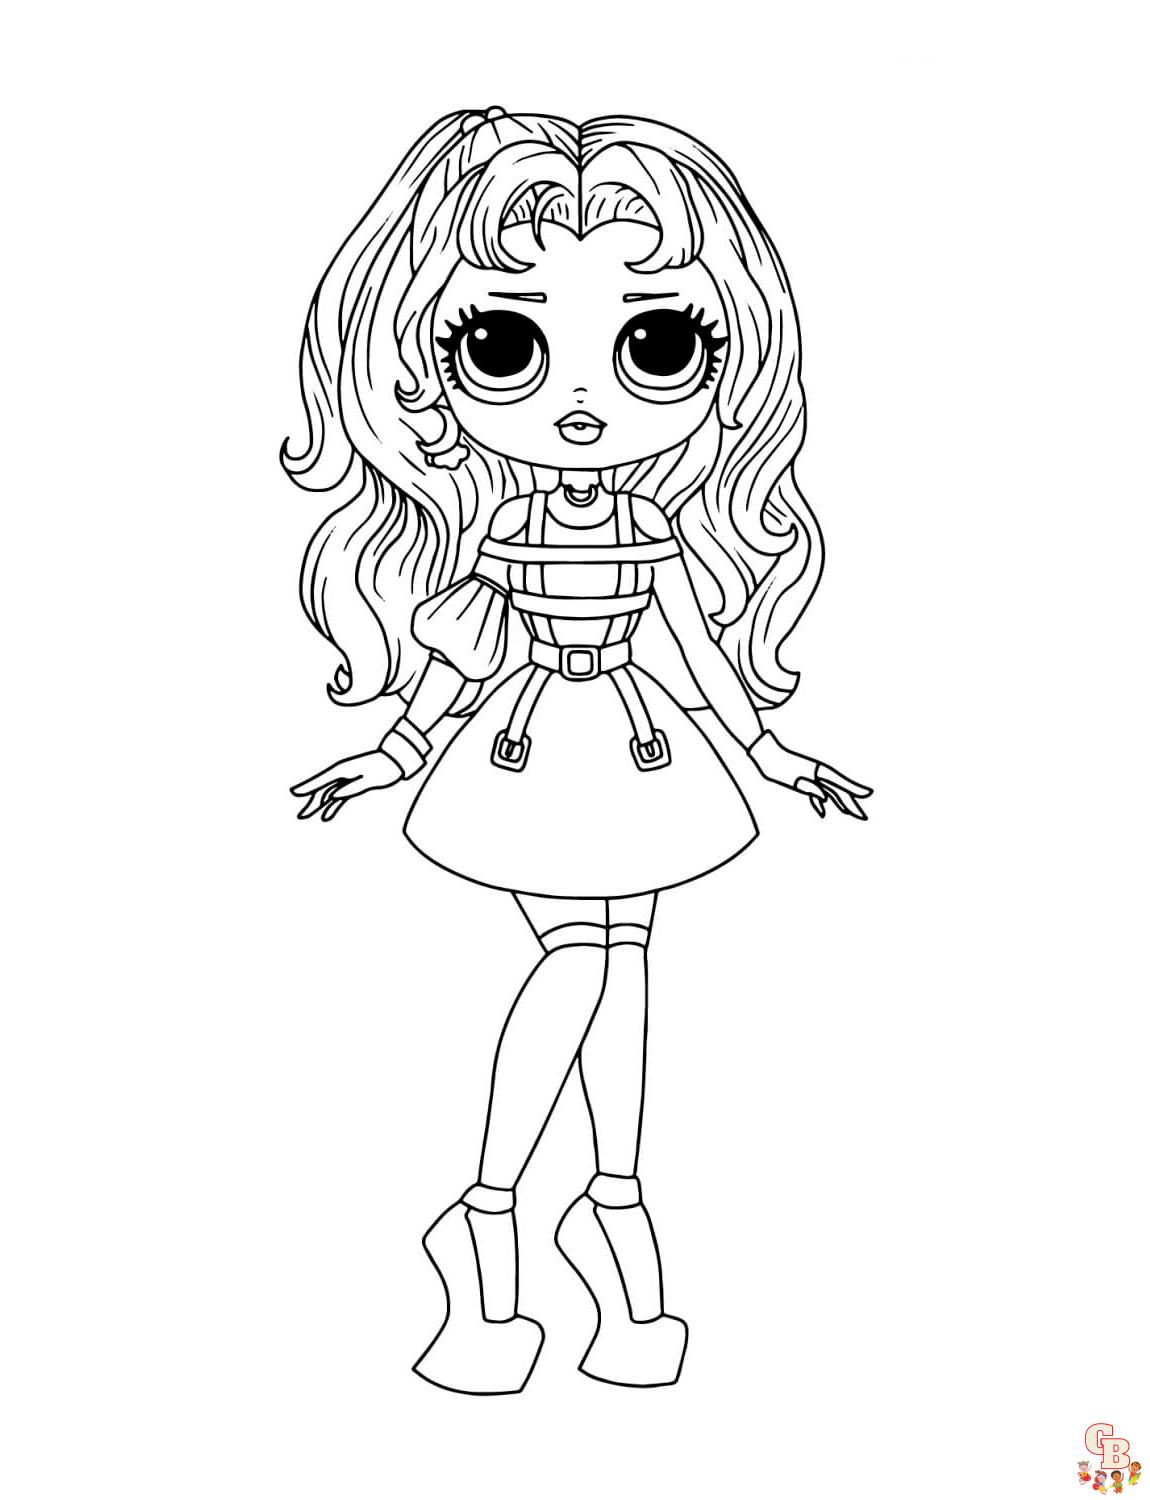 OMG Fashion LOL OMG Doll Coloring Pages - Free and Printable